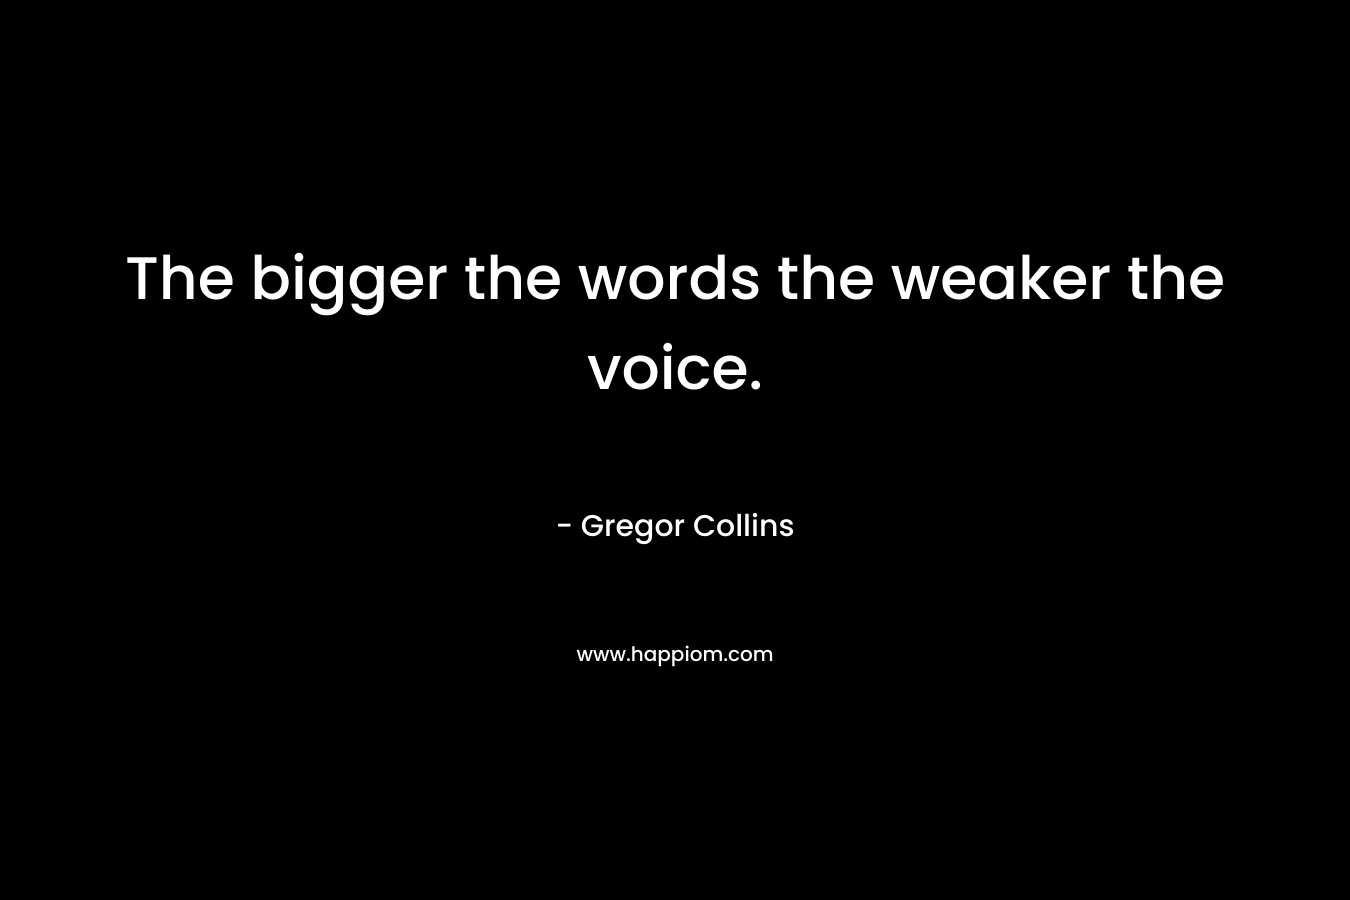 The bigger the words the weaker the voice.